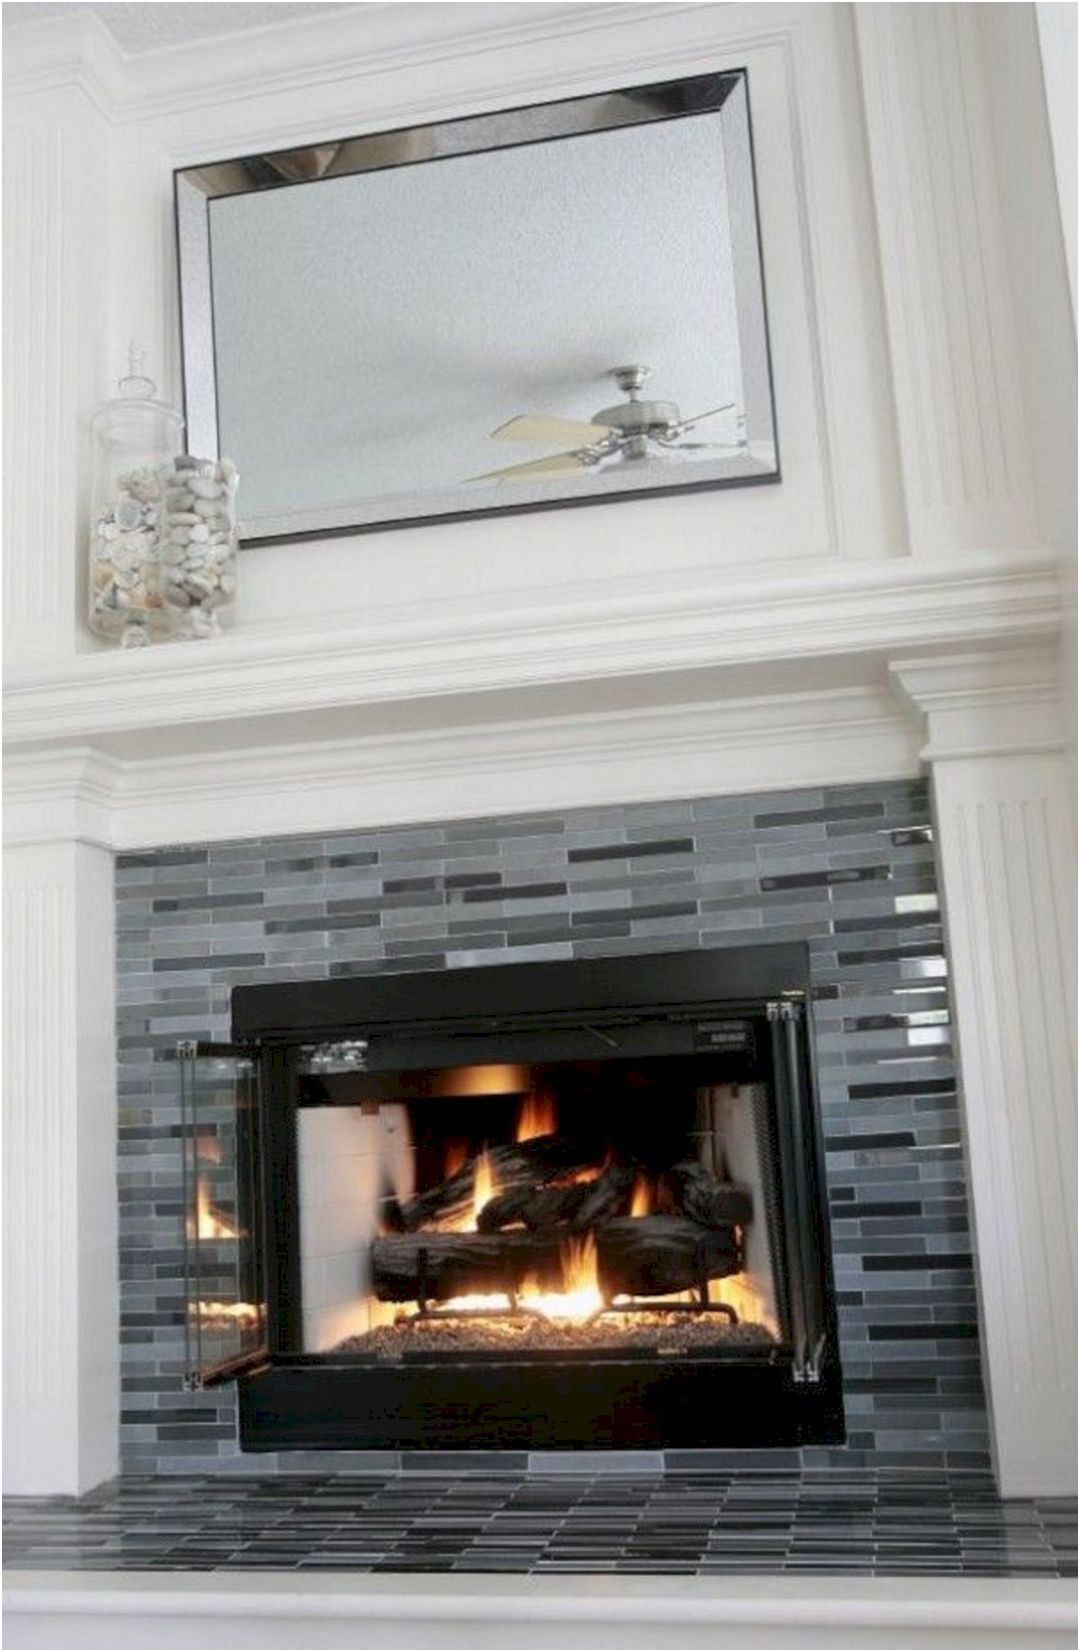 New Fireplace Cover Ideas